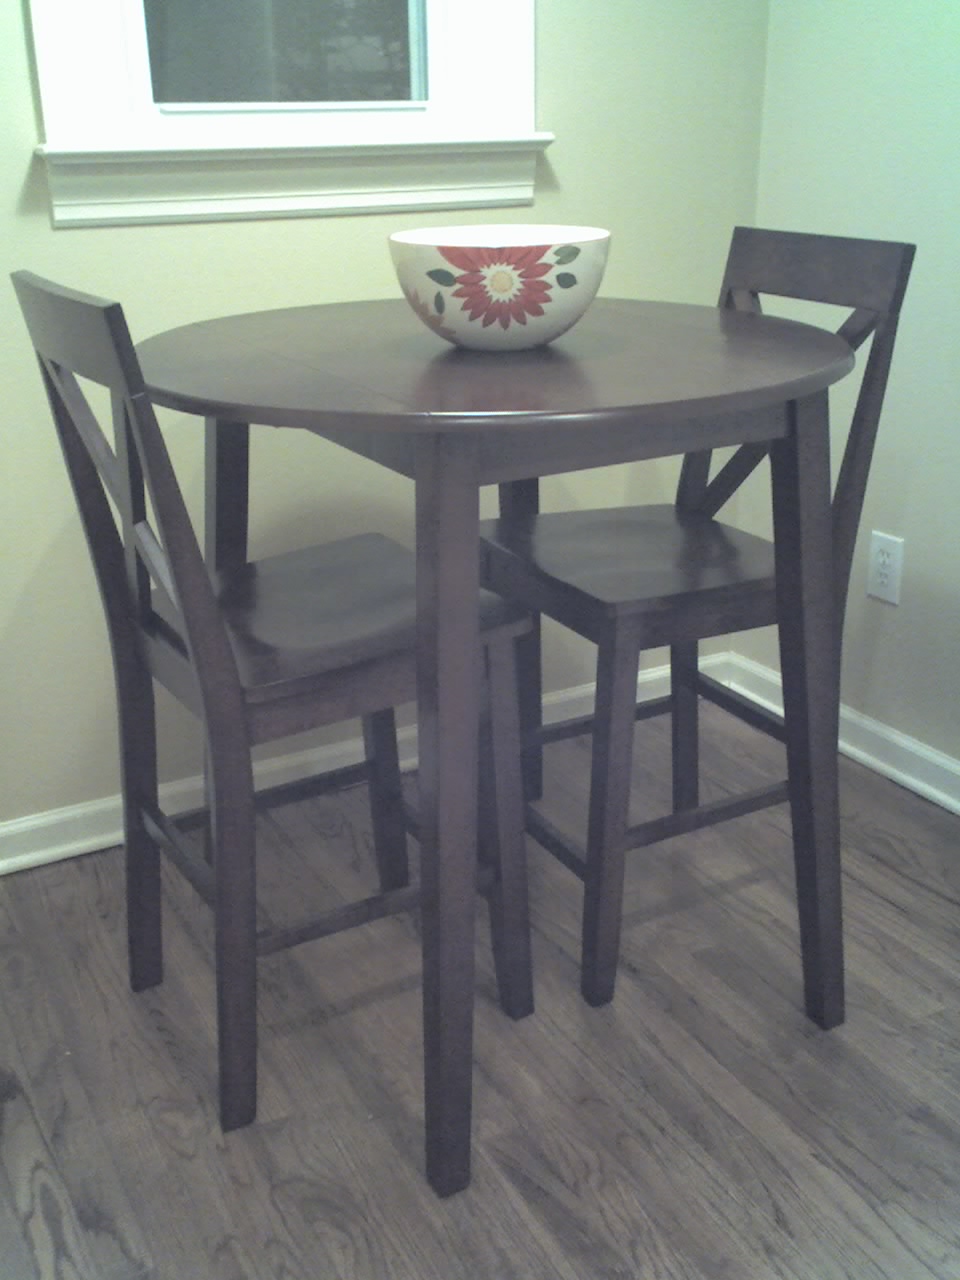 Tall Kitchen Table With Stools, Tall Kitchen Table And Bar Stools